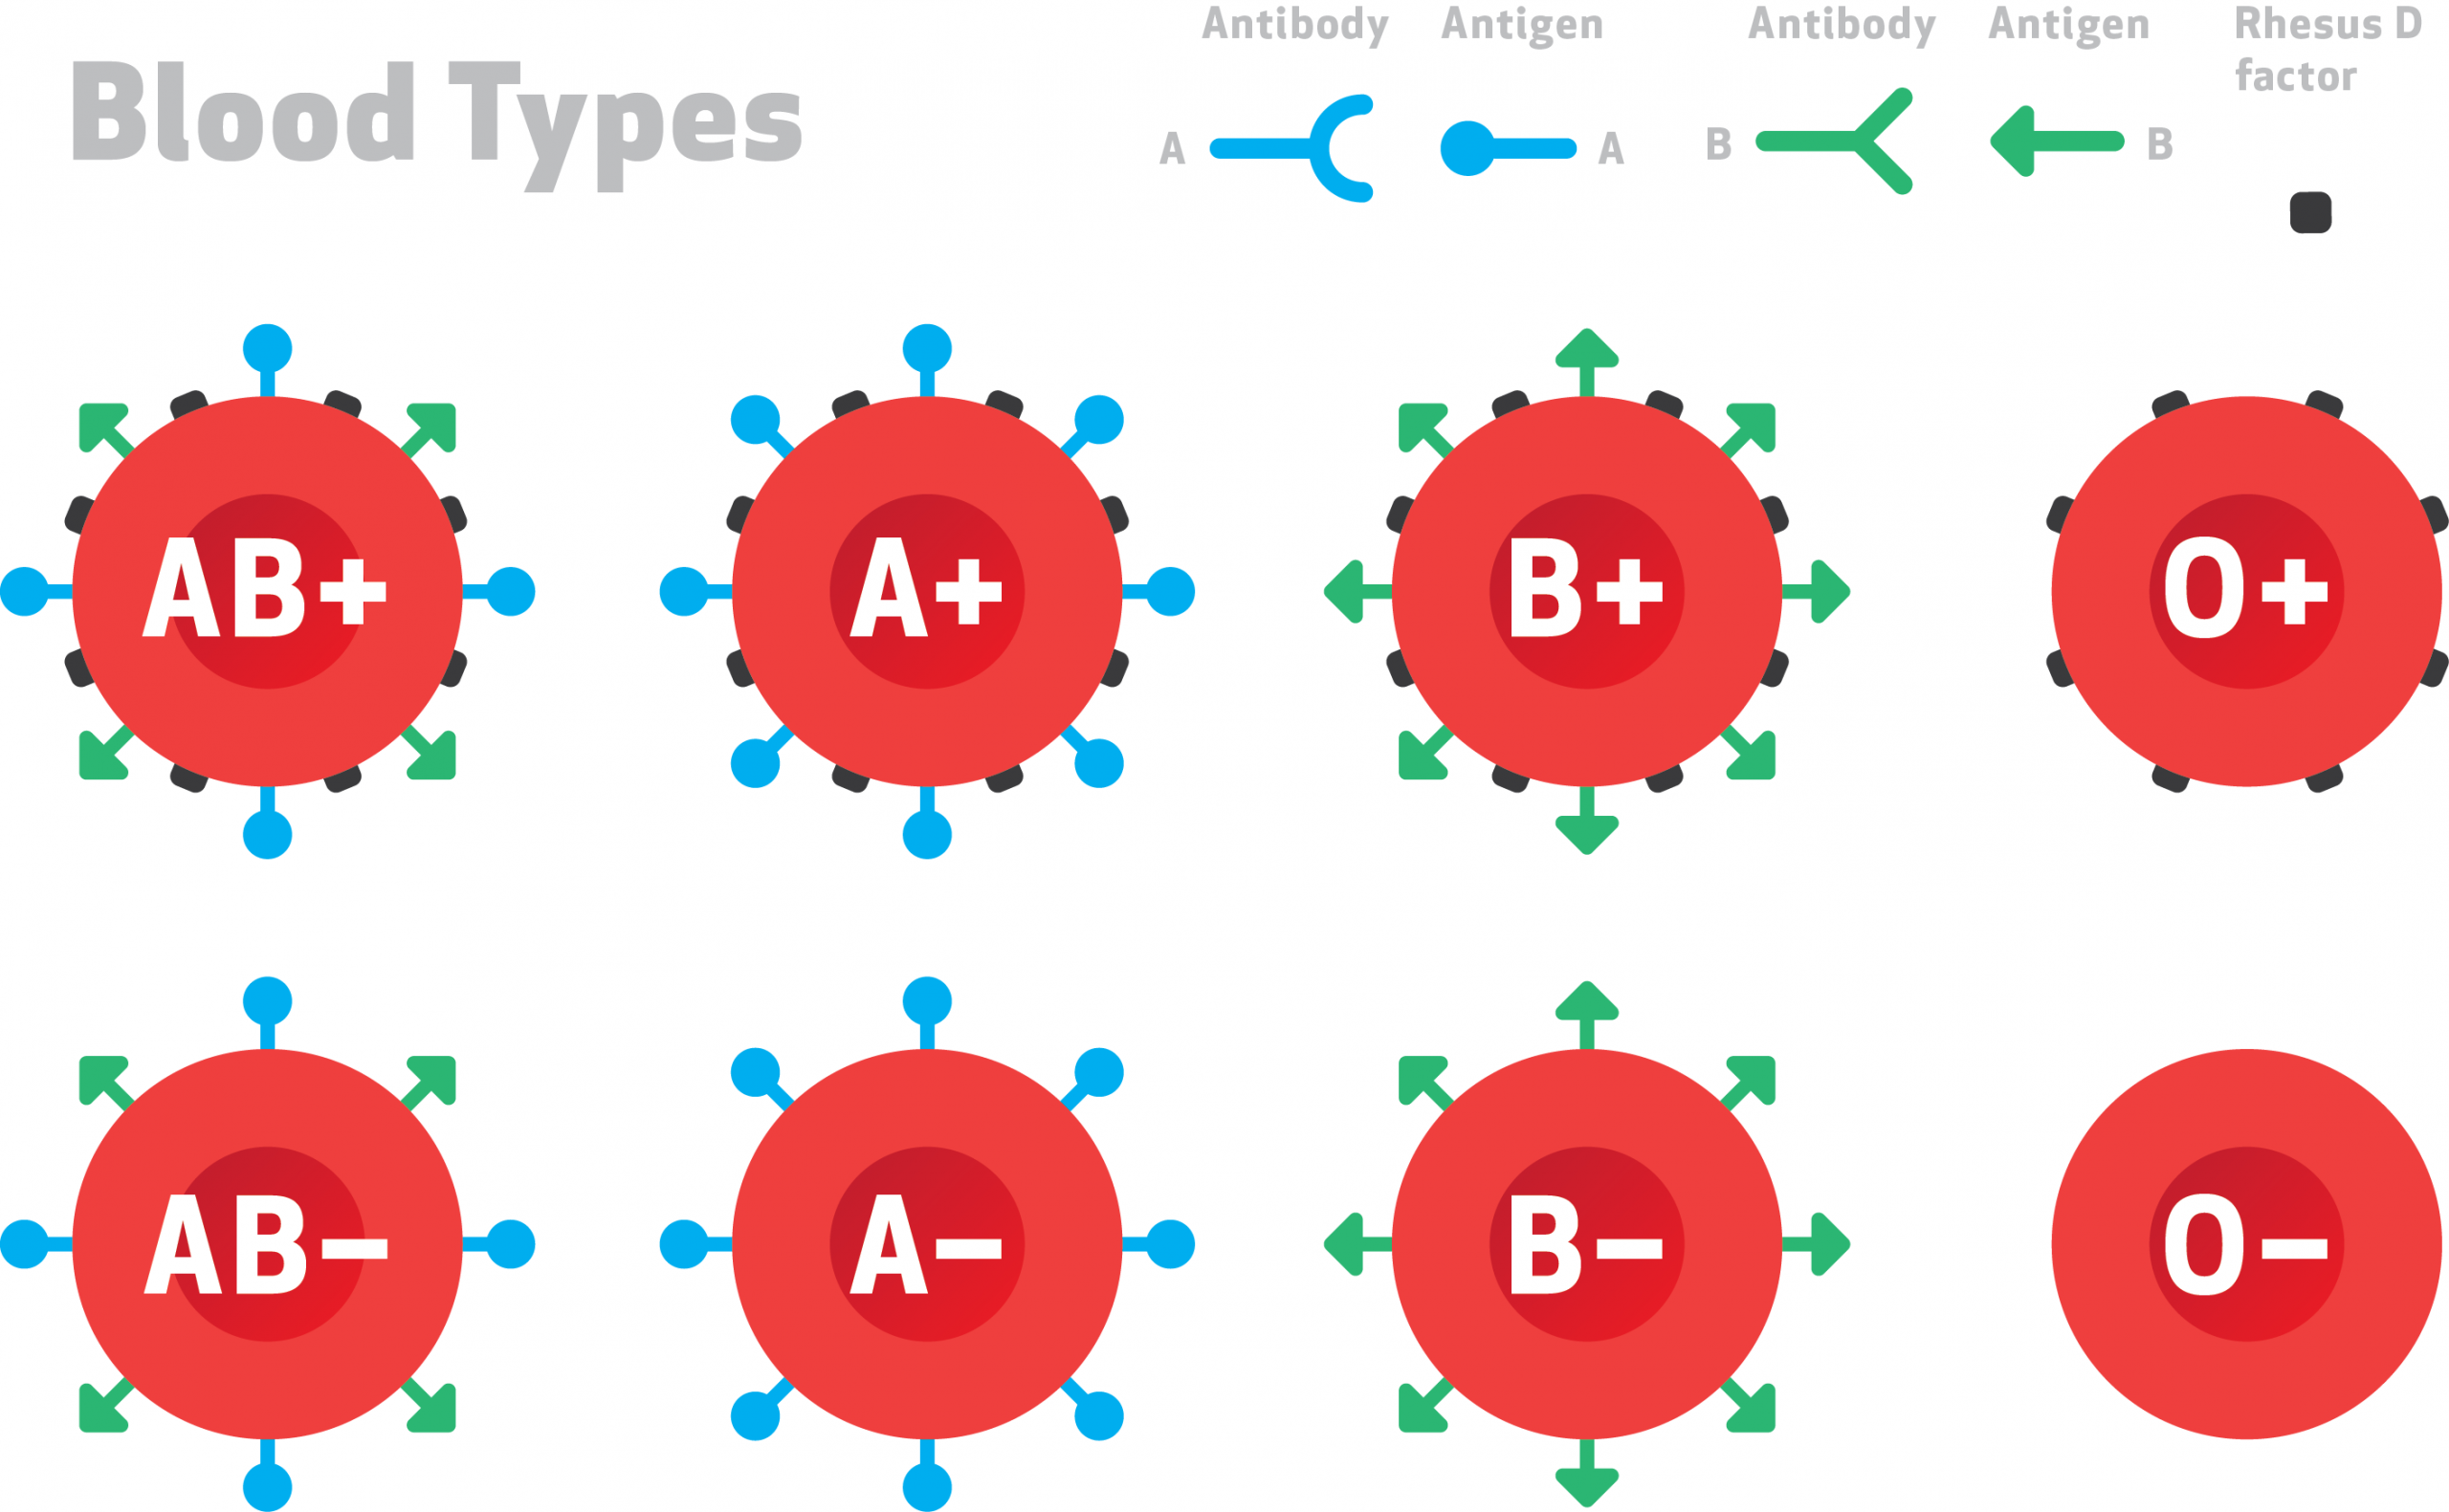 A diagram that shows the surface of different blood types.